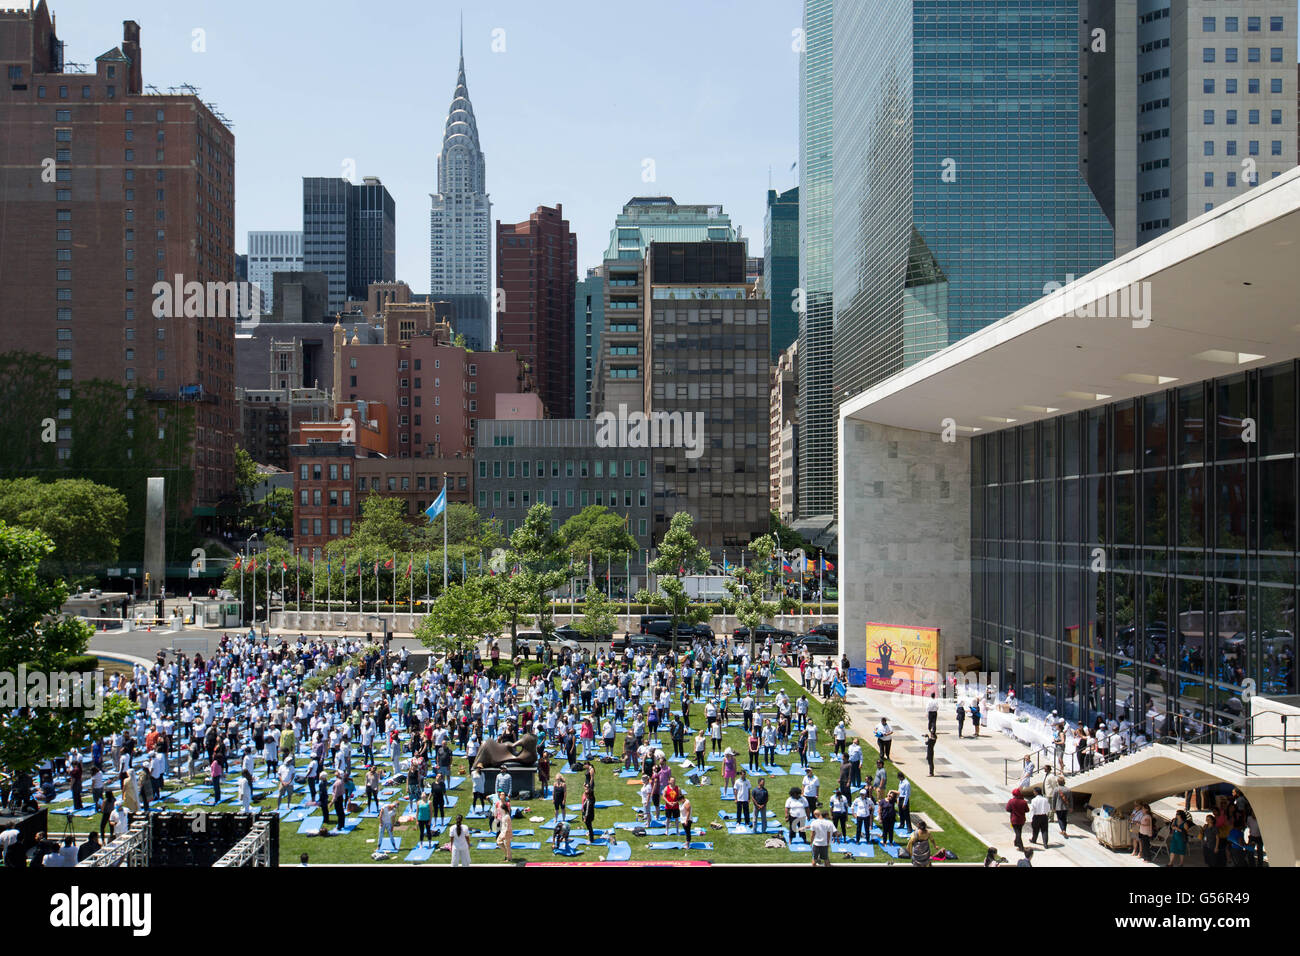 United Nations. 11th Dec, 2014. People attend the celebration of the 2016 International Day of Yoga at the United Nations headquarters in New York, June 21, 2016. This is the second annual celebration of the International Day of Yoga at the United Nations. On Dec. 11, 2014, the UN General Assembly proclaimed in its resolution June 21 as International Yoga Day. © Li Muzi/Xinhua/Alamy Live News Stock Photo